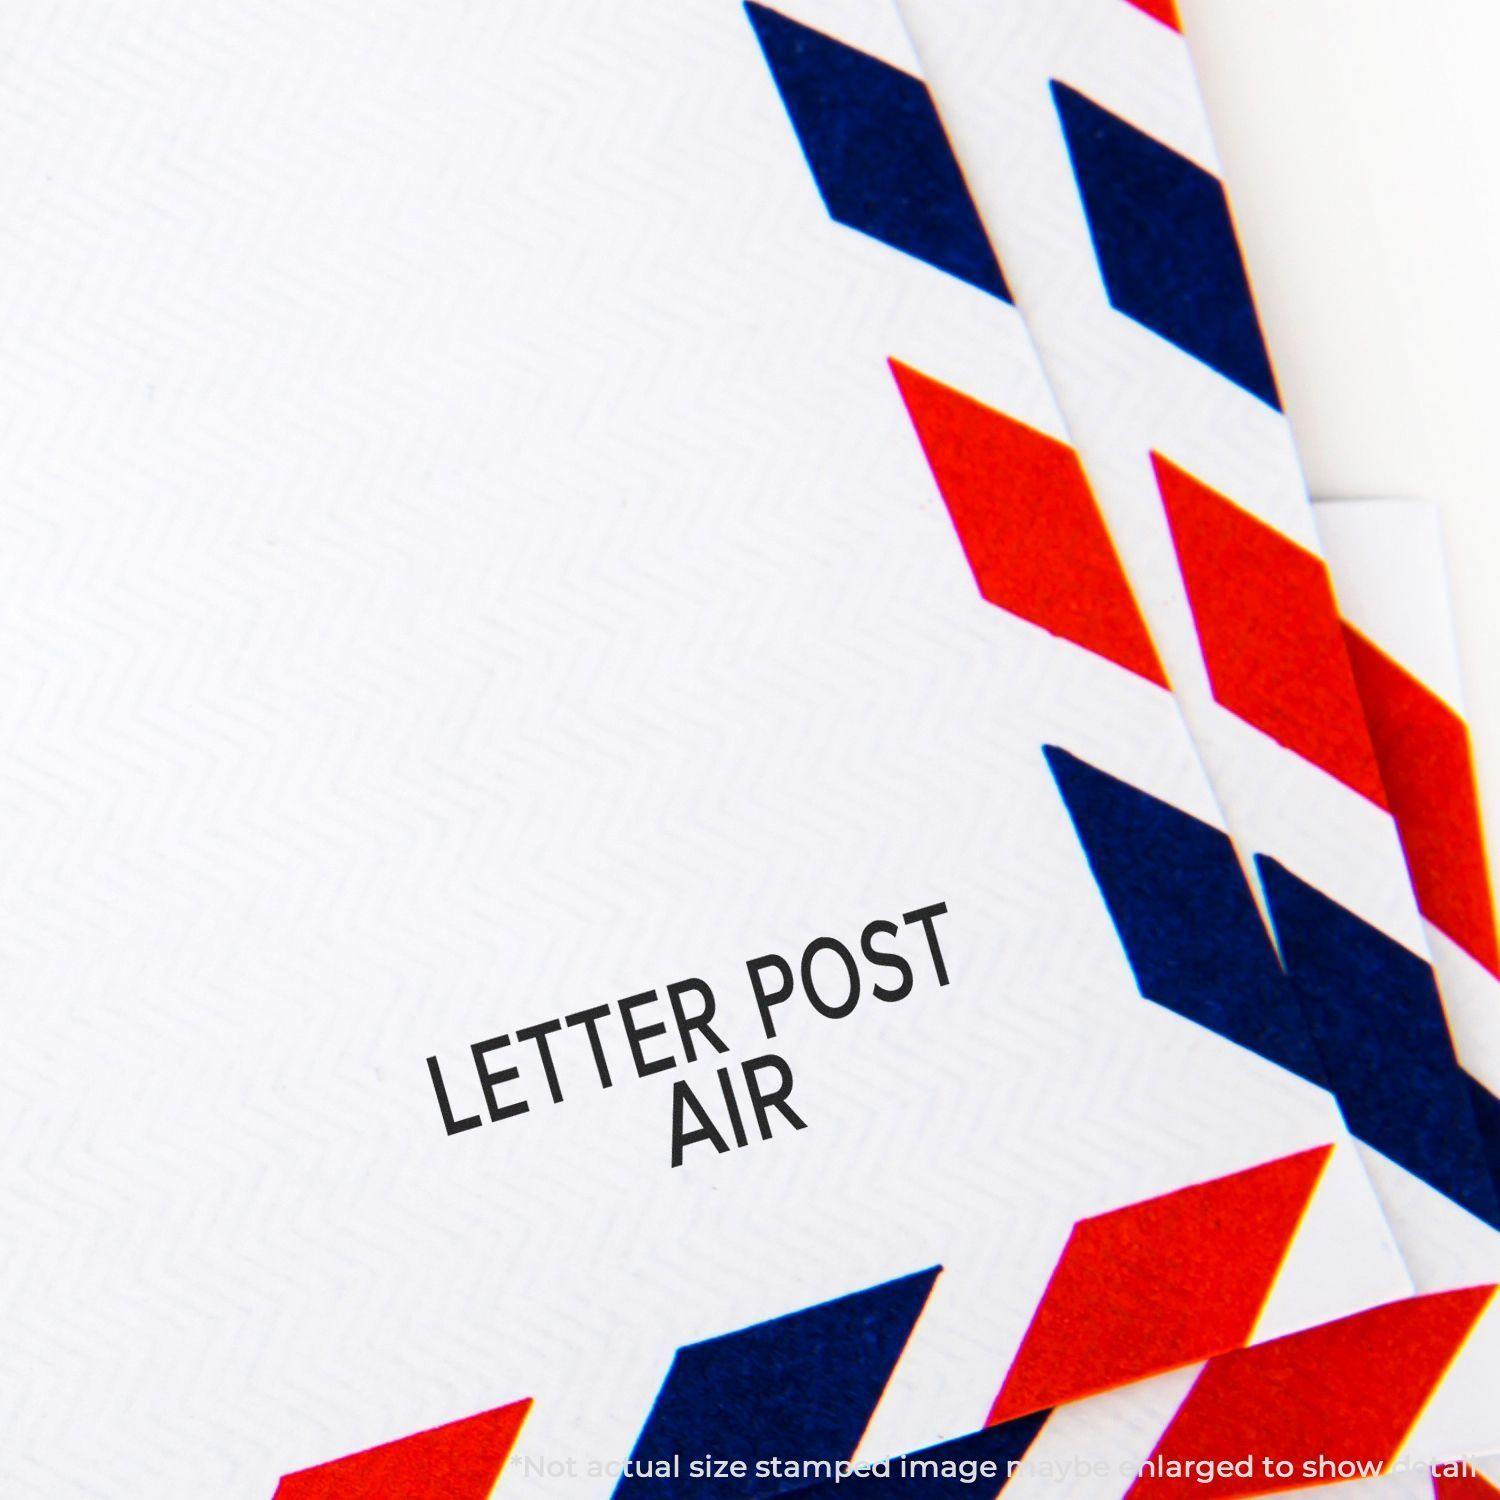 A stock office rubber stamp with a stamped image showing how the text "LETTER POST AIR" is displayed after stamping.